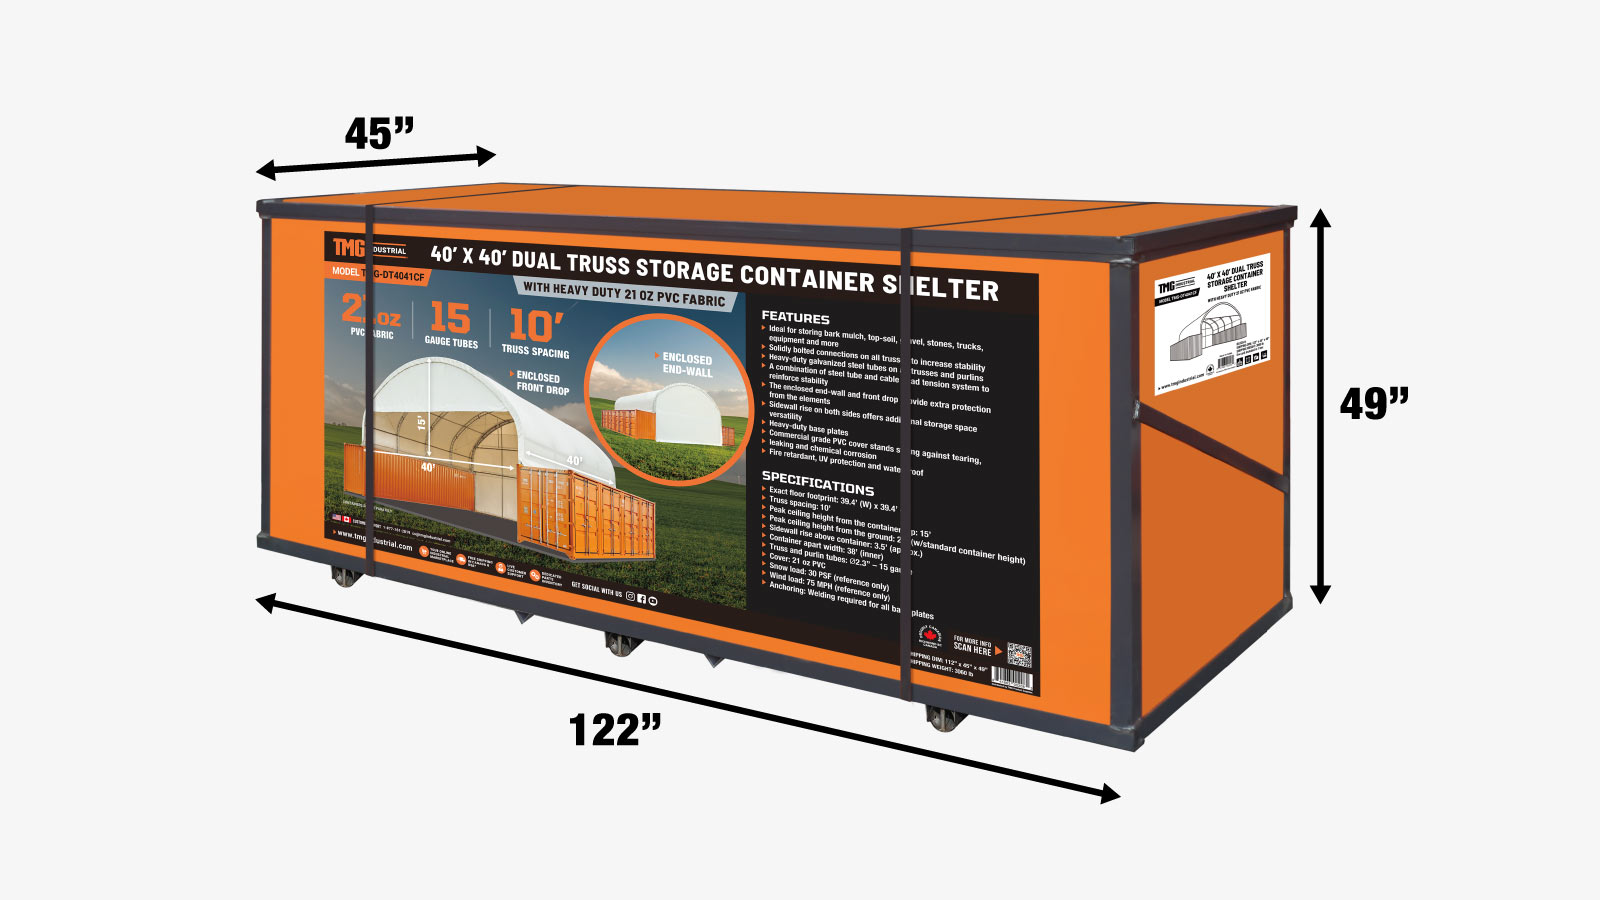 TMG Industrial 40' x 40' Dual Truss Container Shelter with Heavy Duty 21 oz PVC Cover, Enclosed End Wall & Front Drop, TMG-DT4041CF (DT4040CF)-shipping-info-image